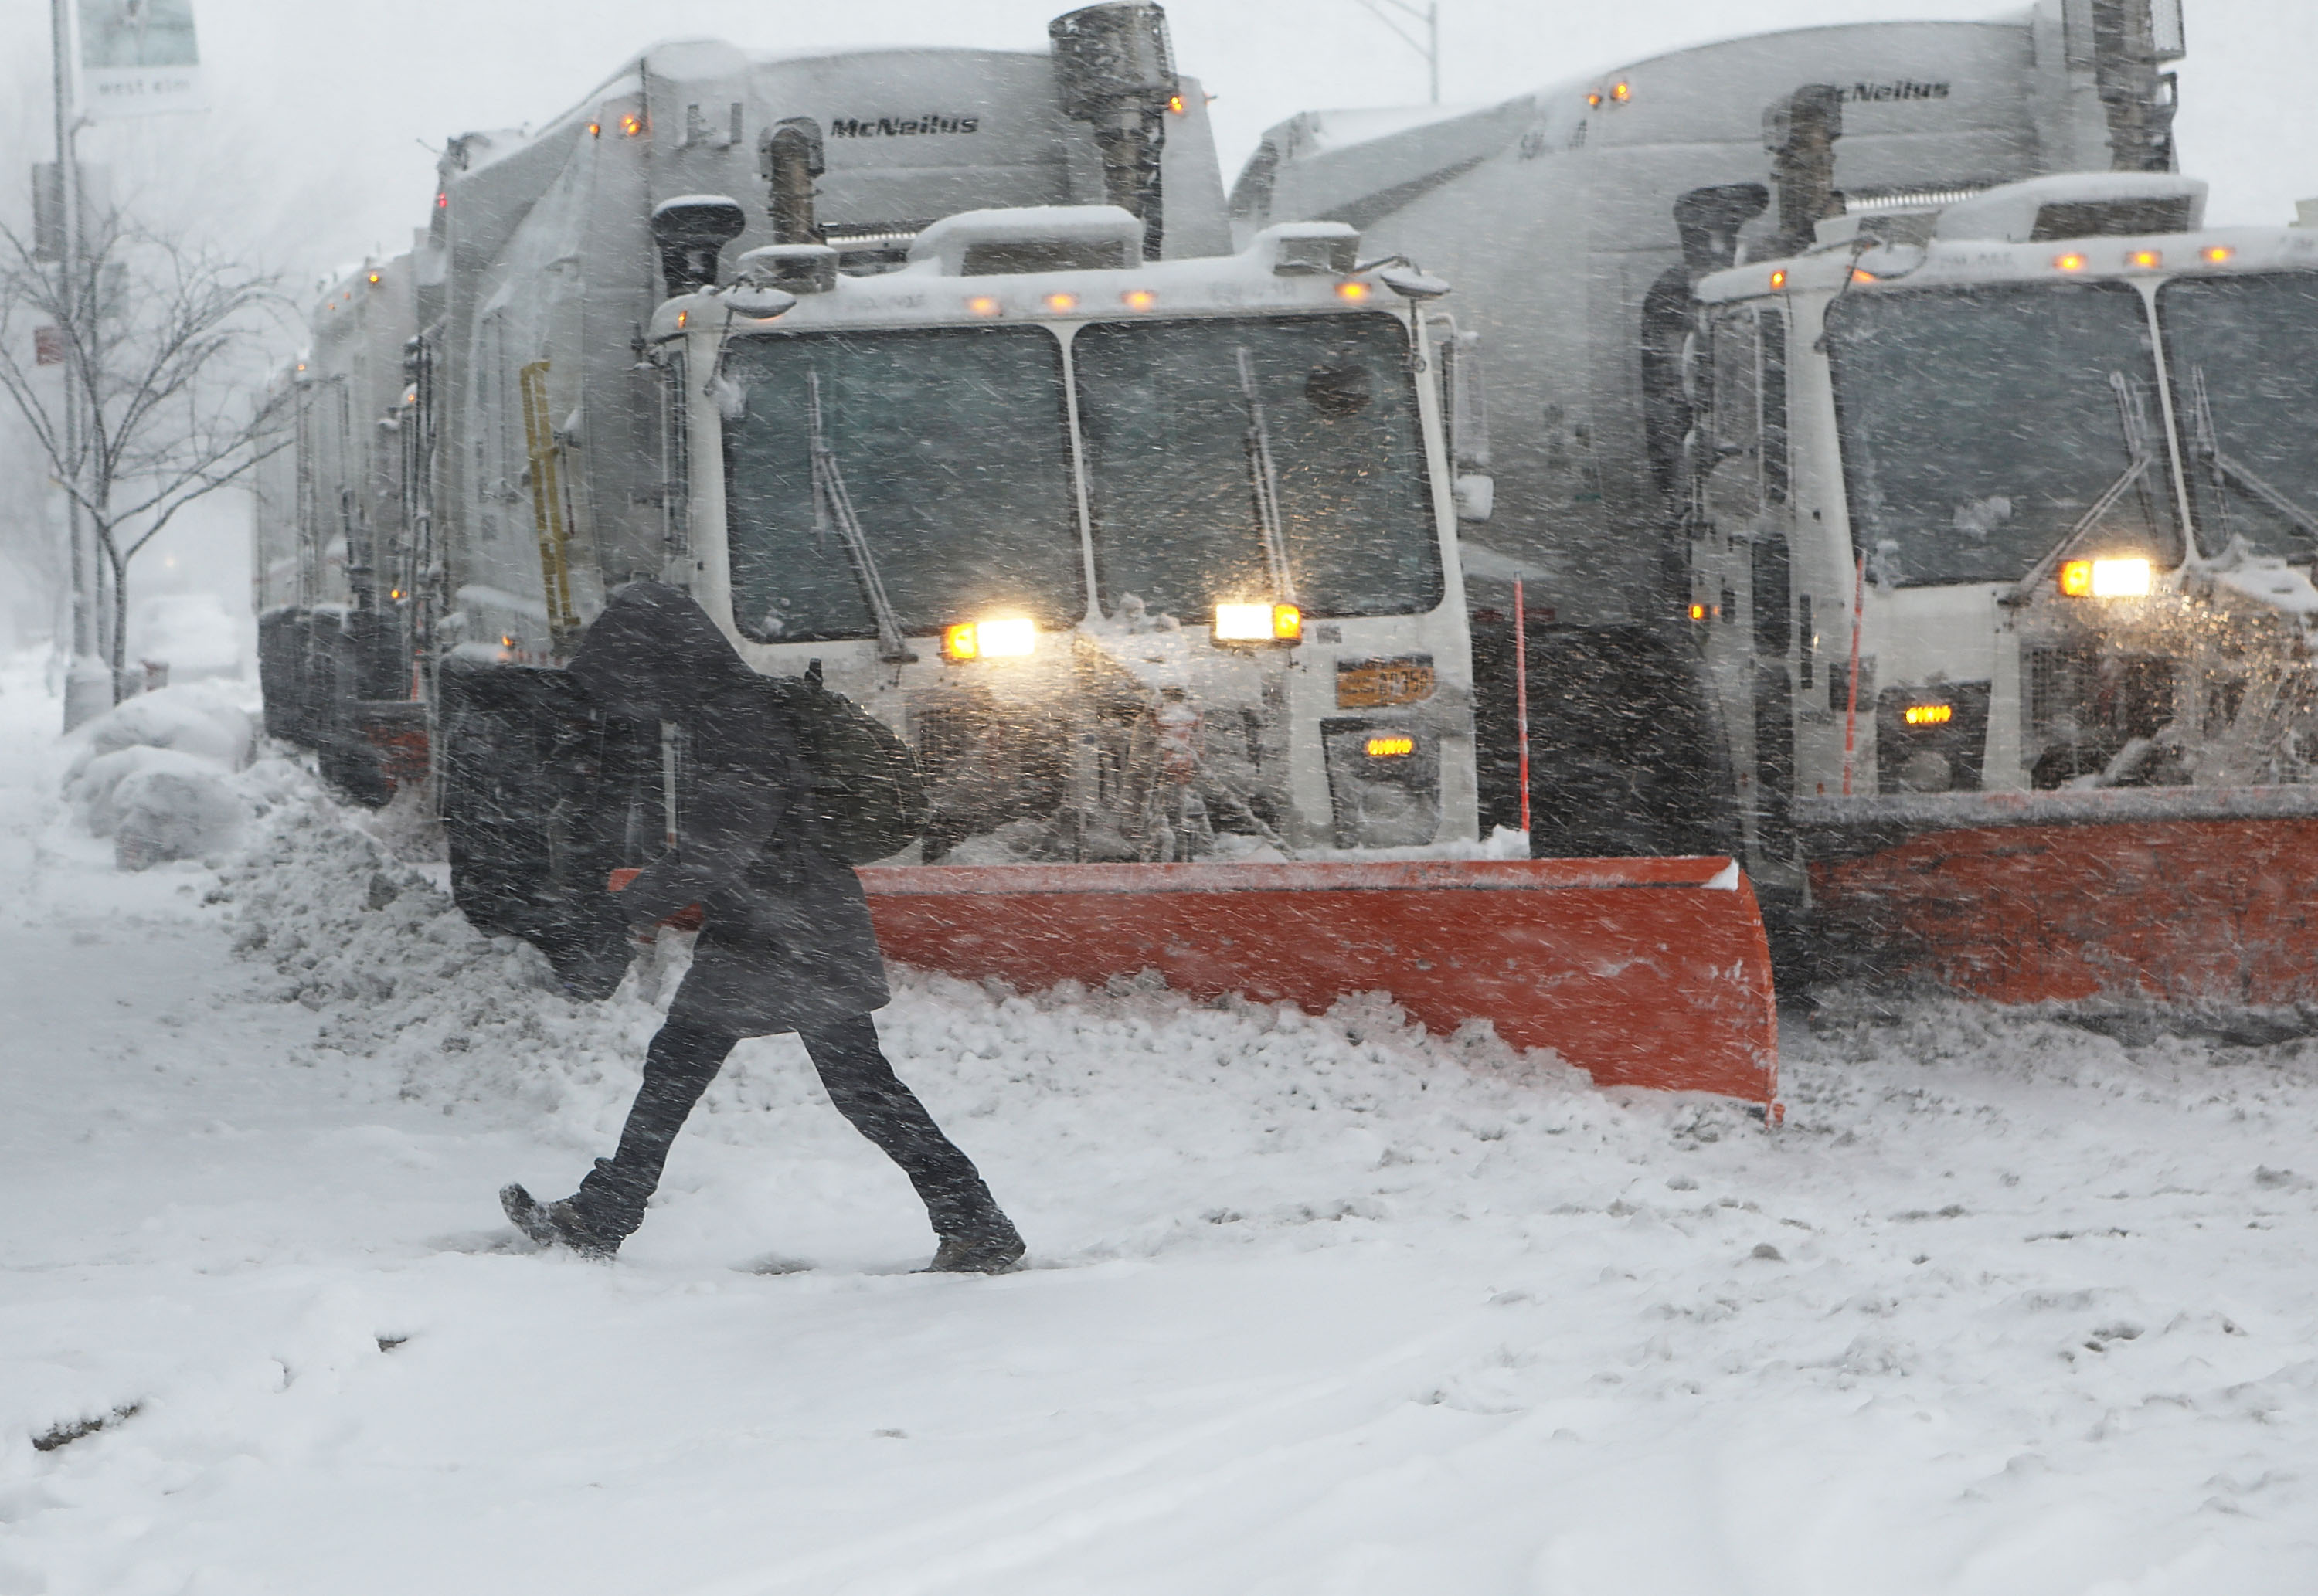 New York Winter Storm The Photos You Need to See